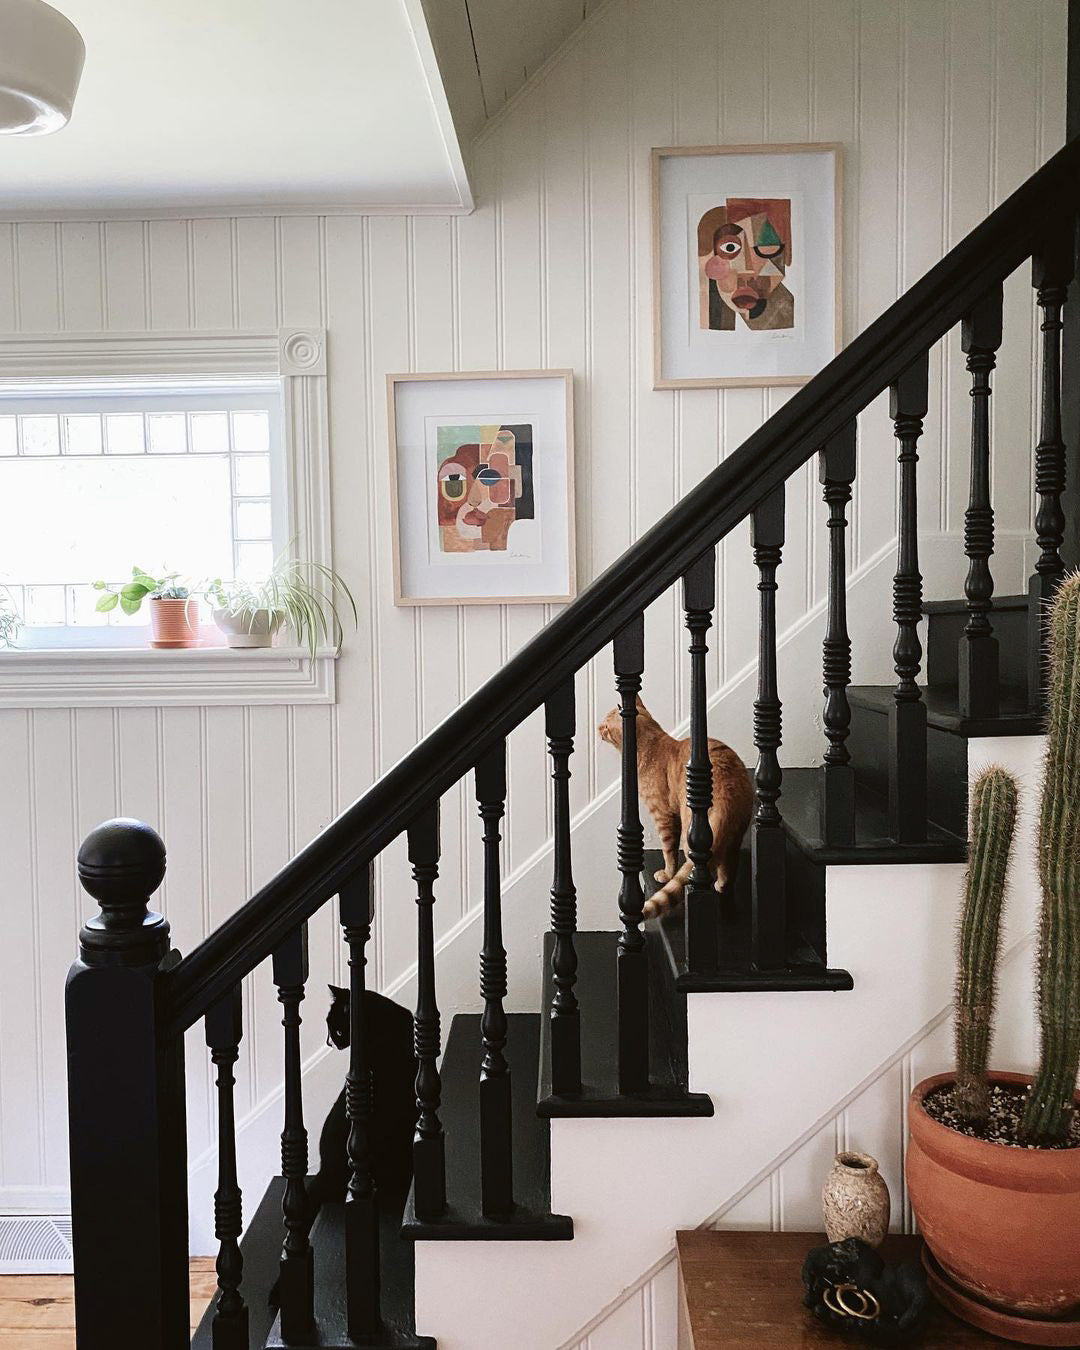 Creative paint ideas to inspire your next project. A fresh coat of black paint Blackish from Clare adds drama to a staircase.